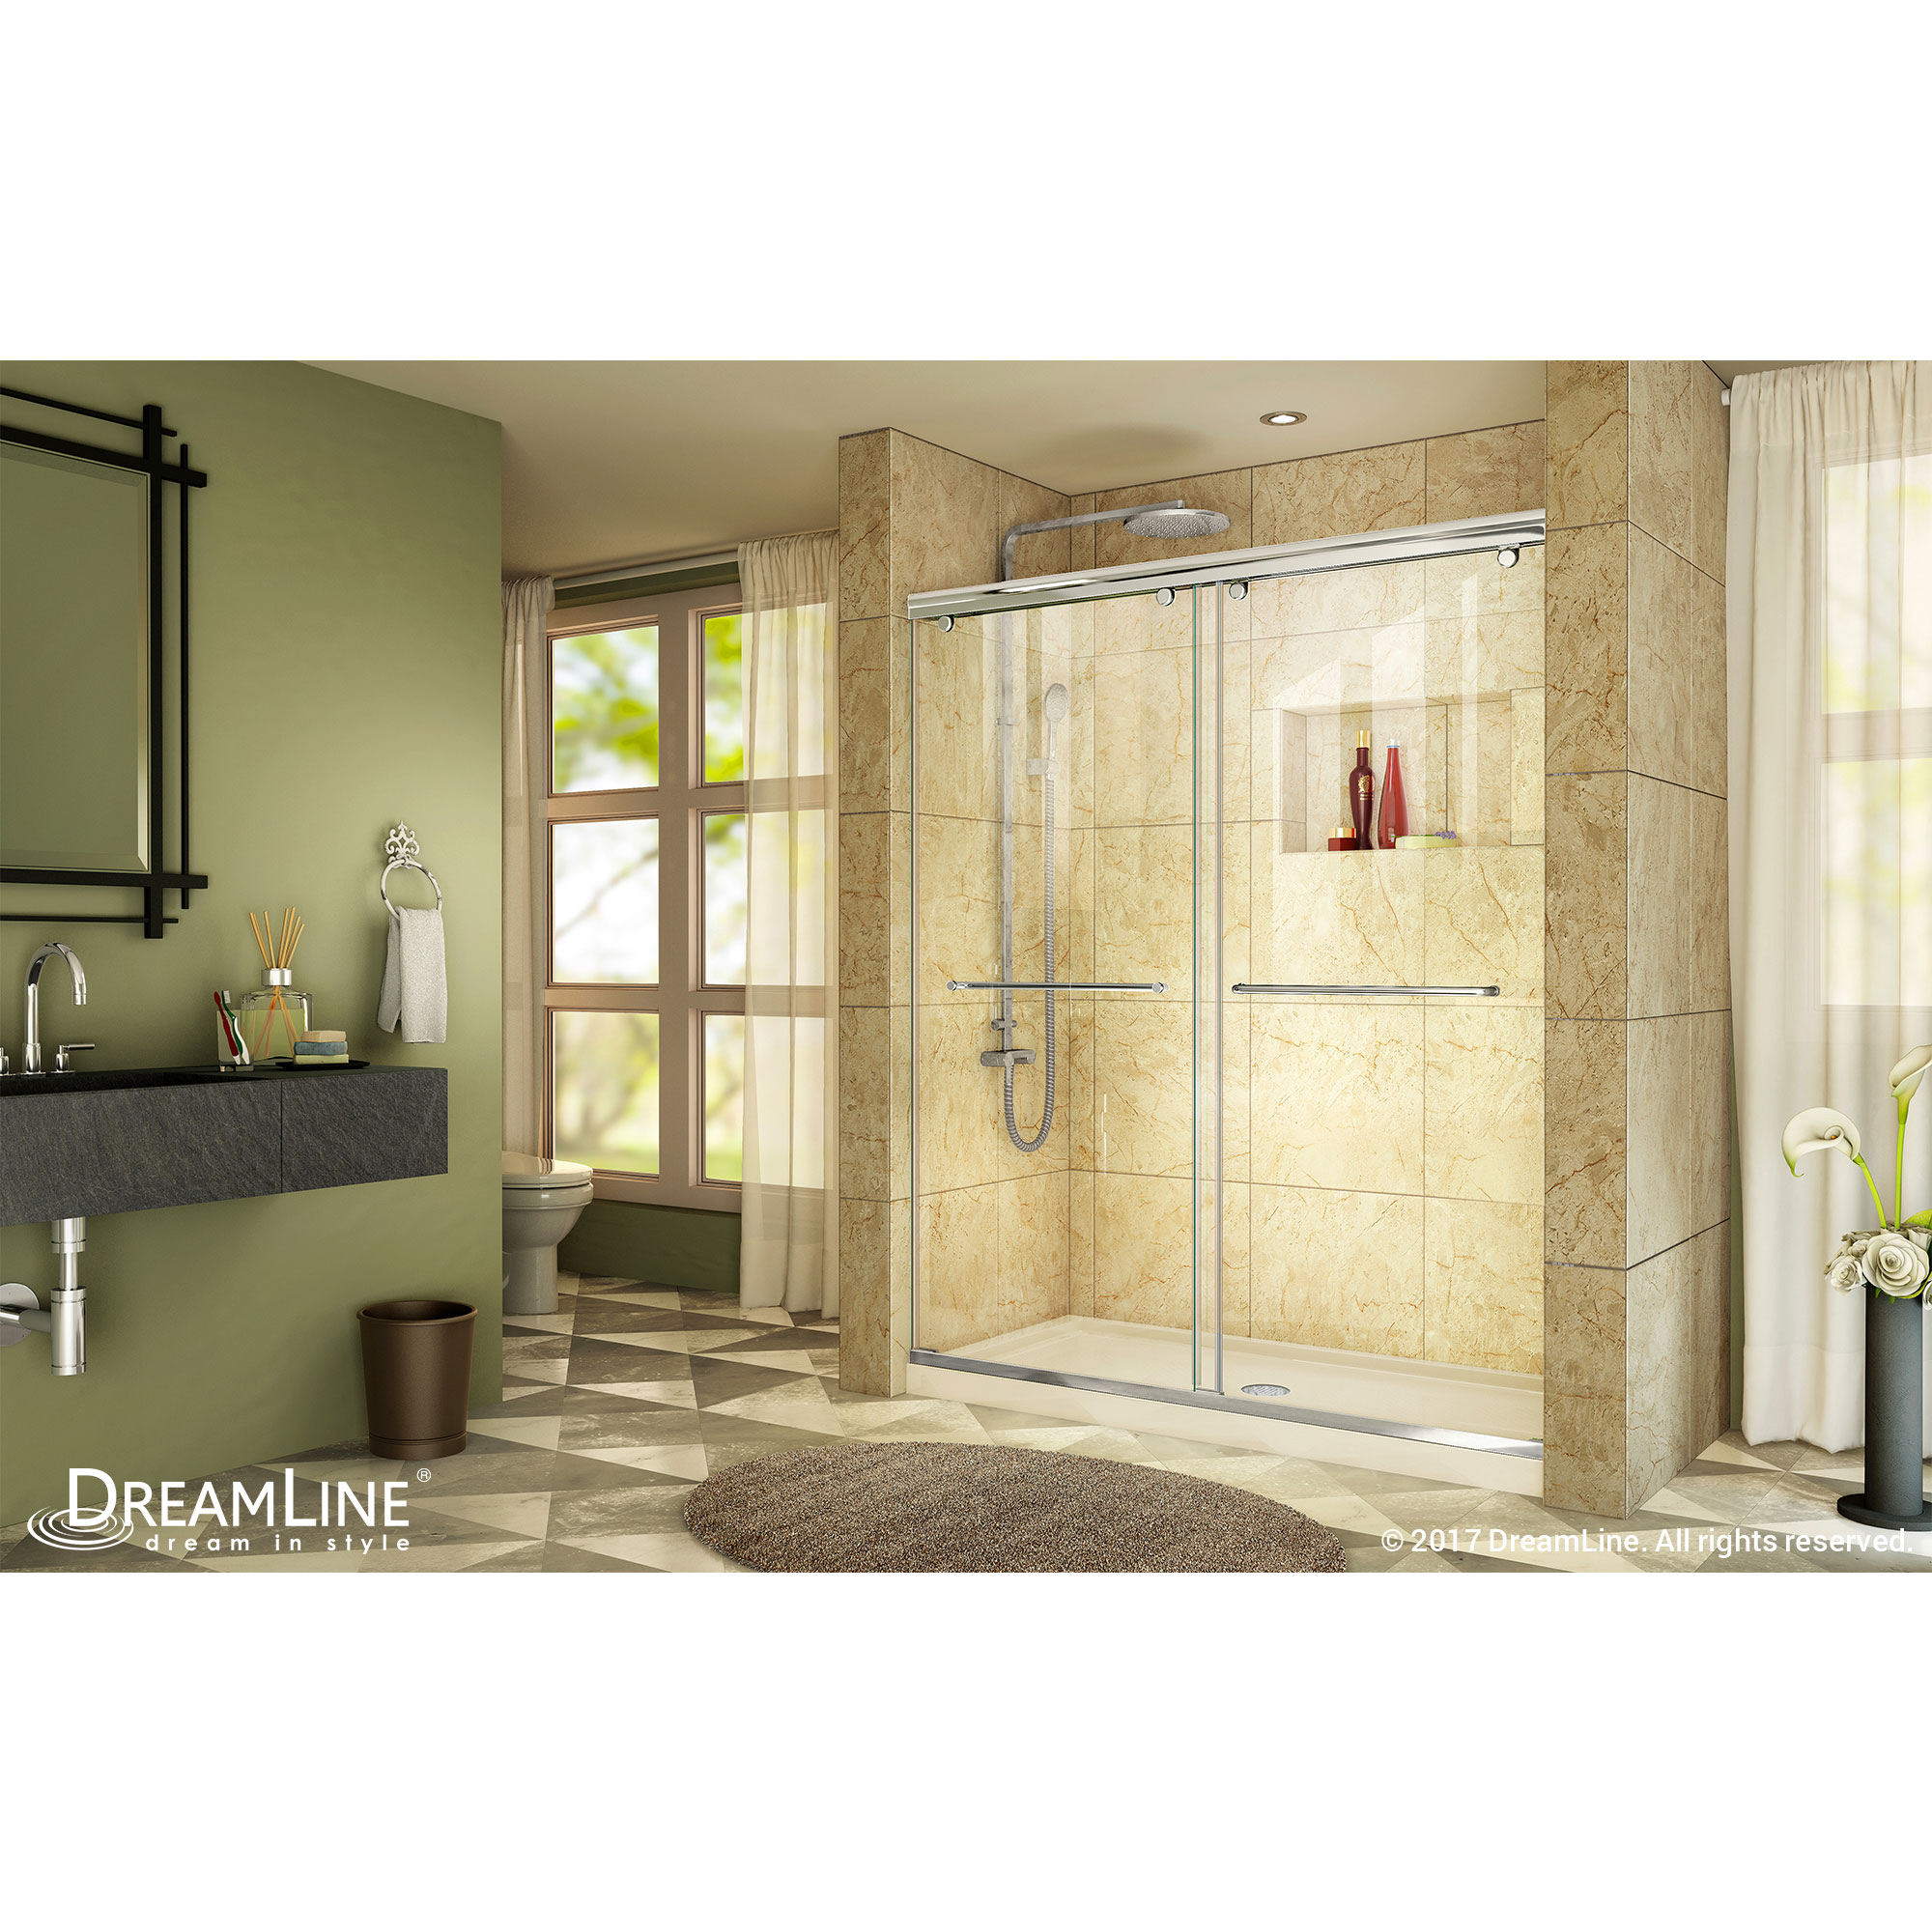 DreamLine Charisma 34 in. D x 60 in. W x 78 3/4 in. H Bypass Shower Door in Chrome with Center Drain Biscuit Base Kit